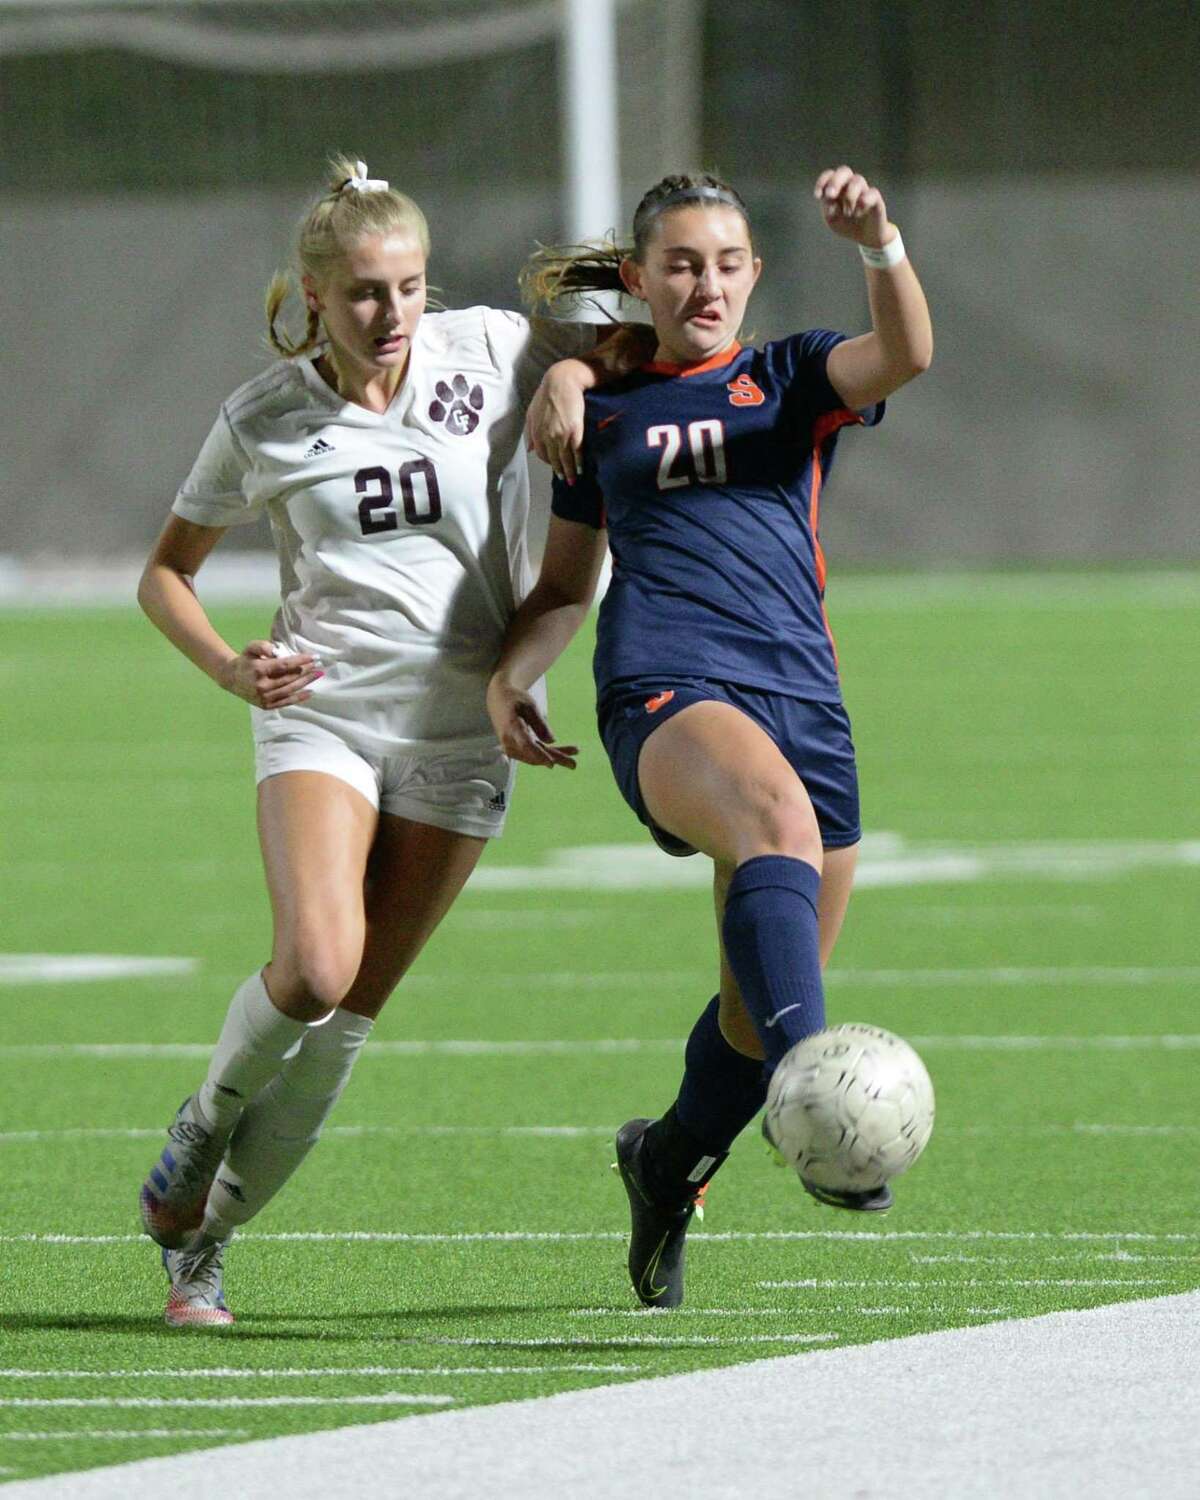 Katie Lennon (20) of Seven Lakes traps a ball as Ava Drouin (20) of Cy-Fair challenges during the second half of a 6A-III regional quarterfinal soccer match between the Seven Lakes Spartans and the Cy-Fair Bobcats on Friday, April 2, 2021 at Rhodes Stadium, Katy, TX.